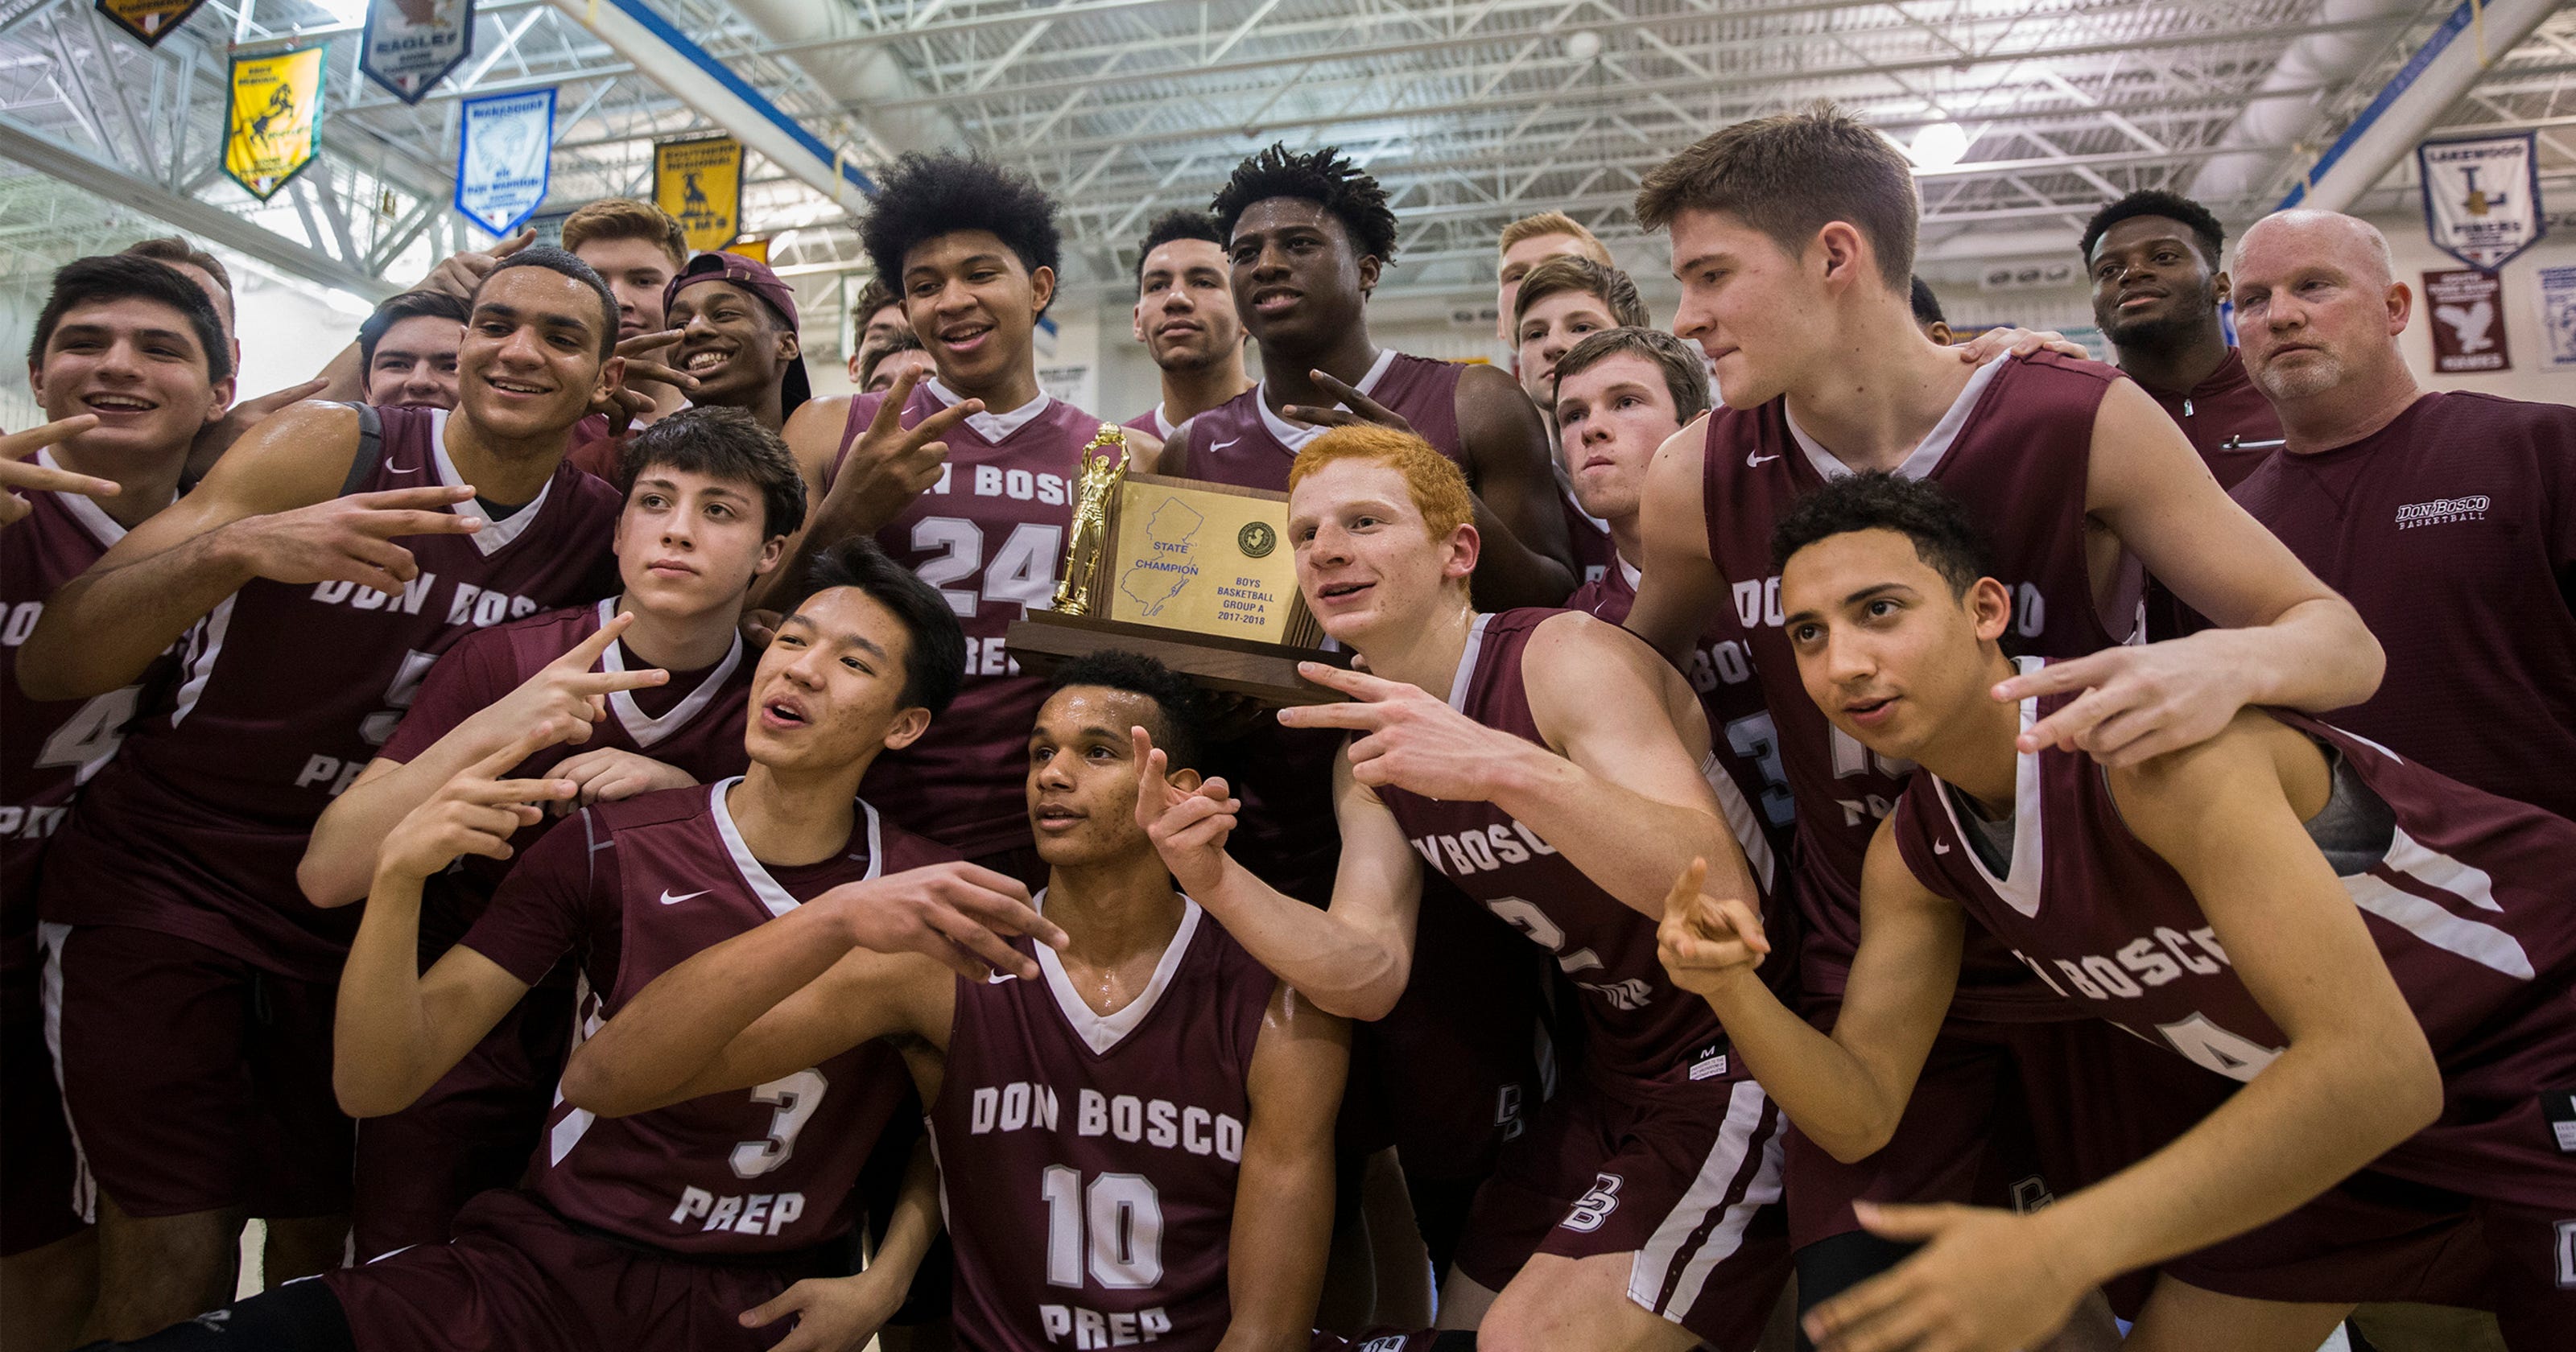 Don Bosco repeats as state champ in NJ basketball tournament